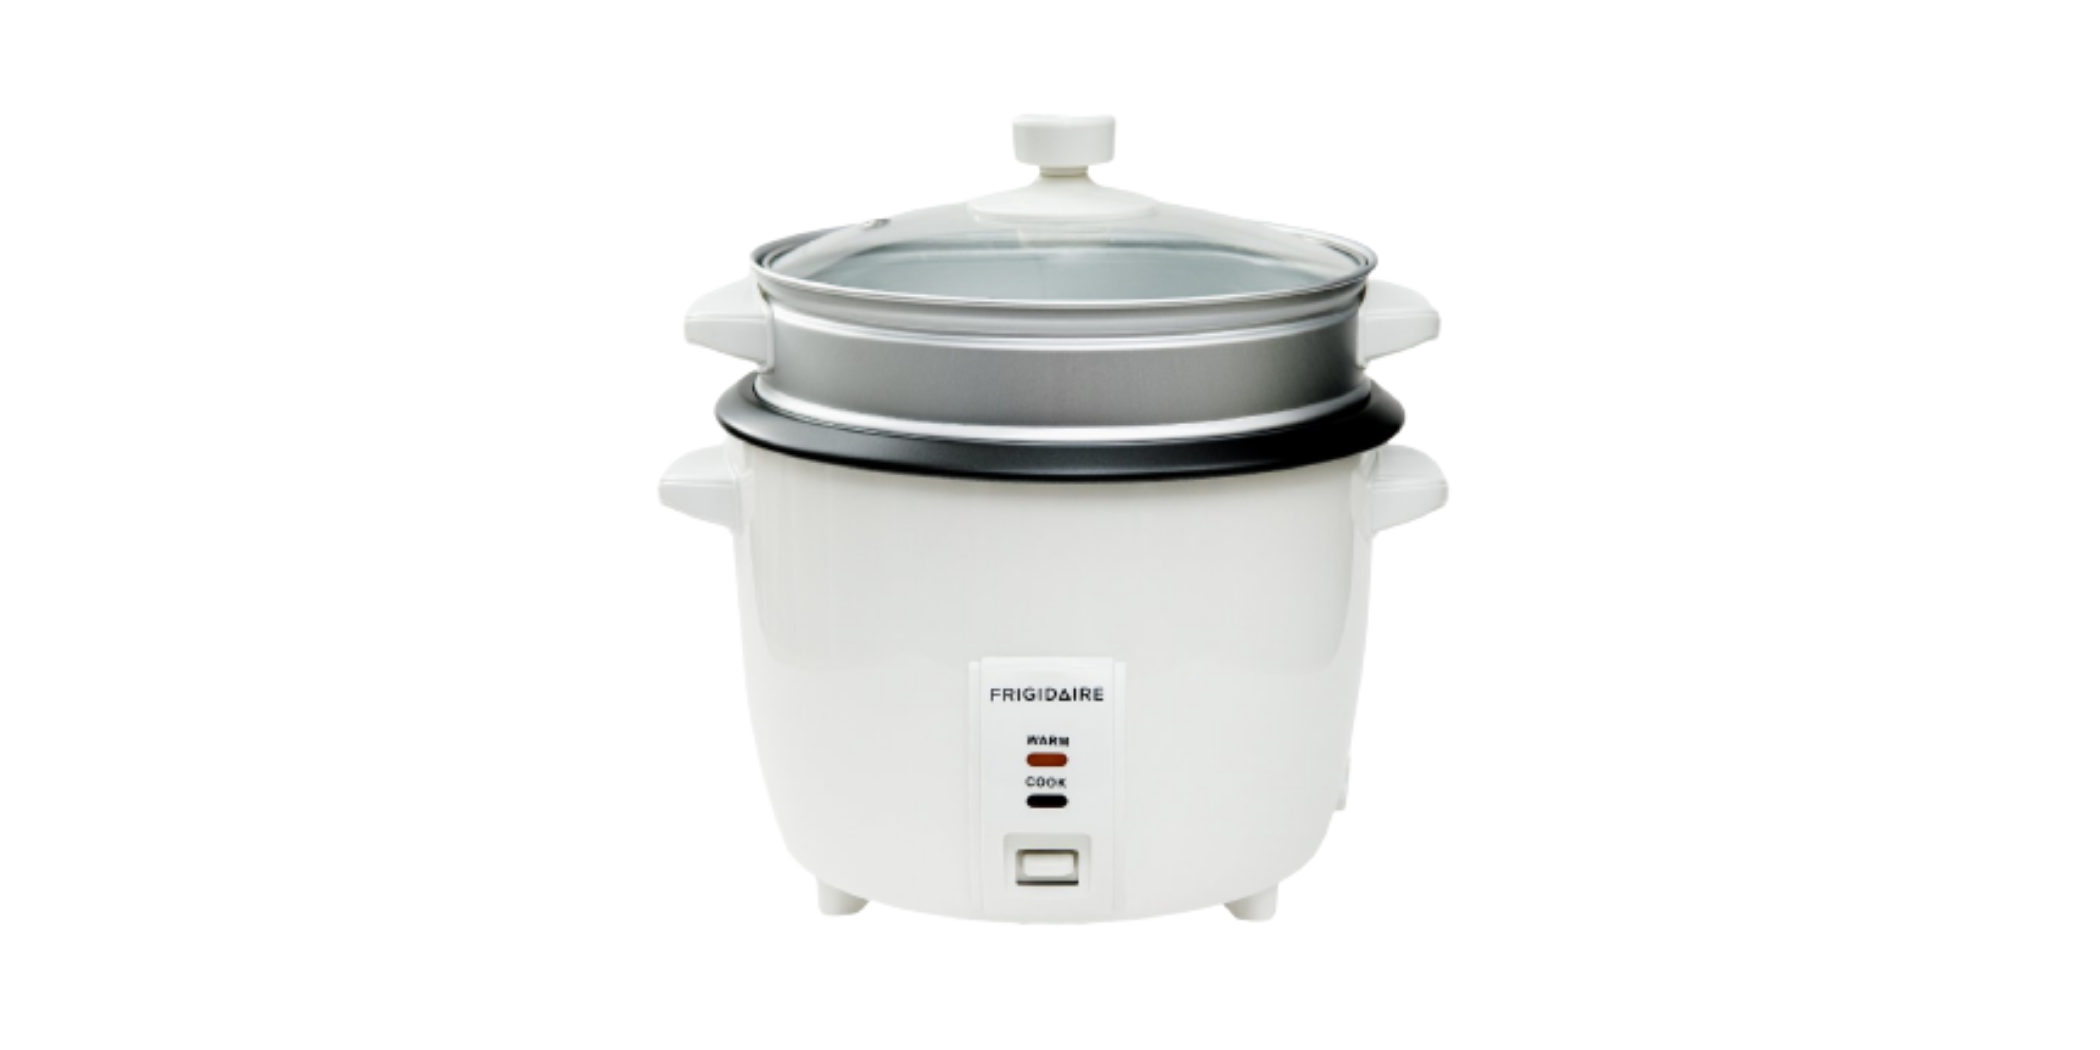 Frigidaire FD8028S 2.8L WH Rice Cooker + Steamer